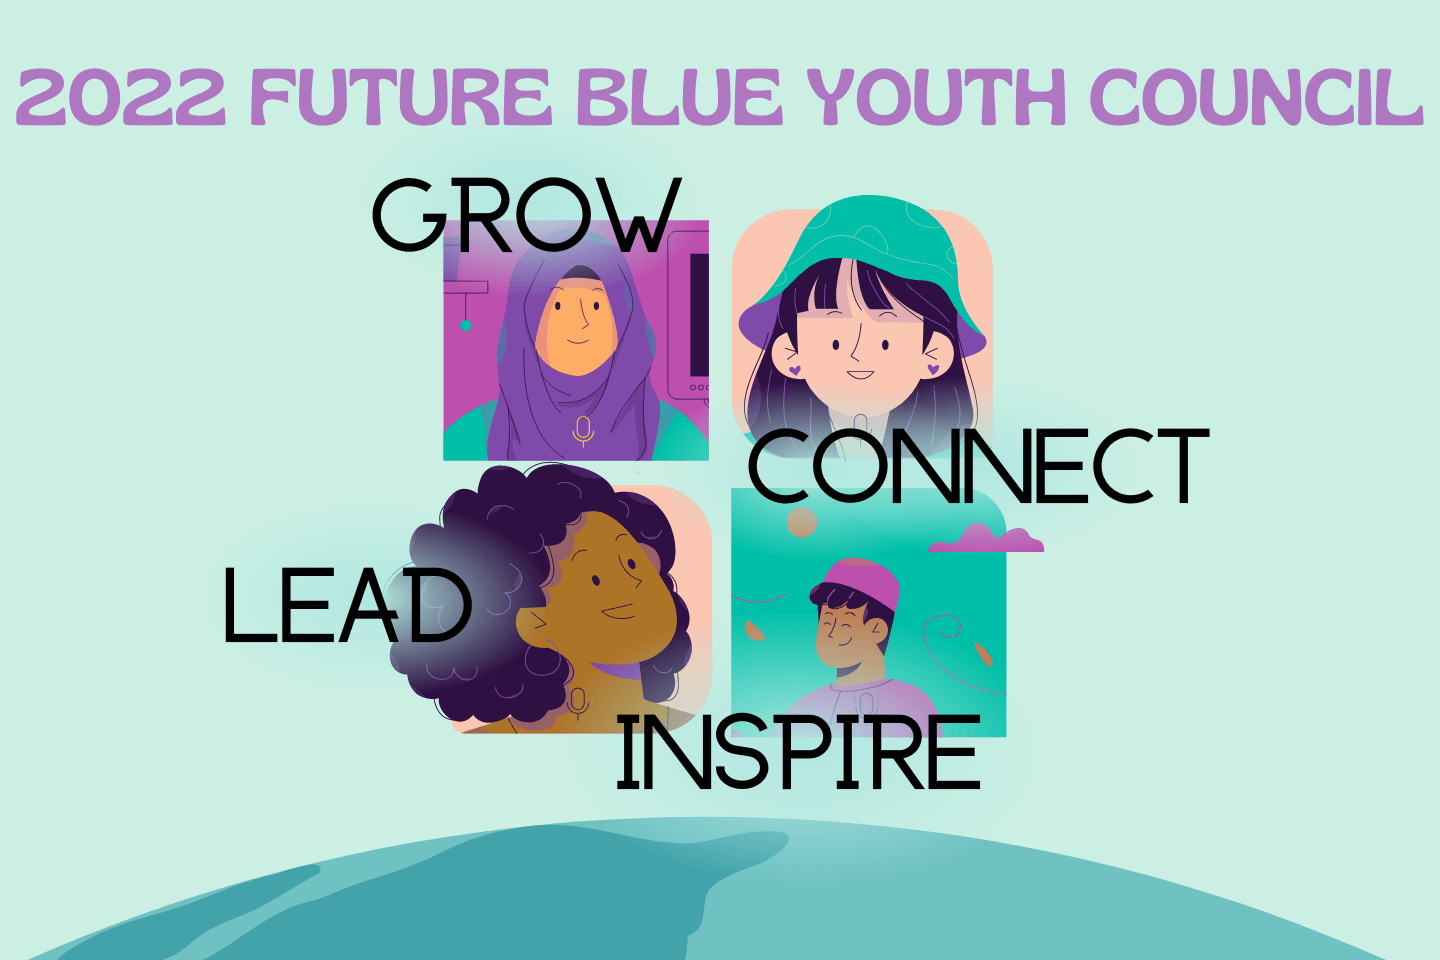 Ocean-Loving Bow Seat Alums: Join the 2022 Future Blue Youth Council ...